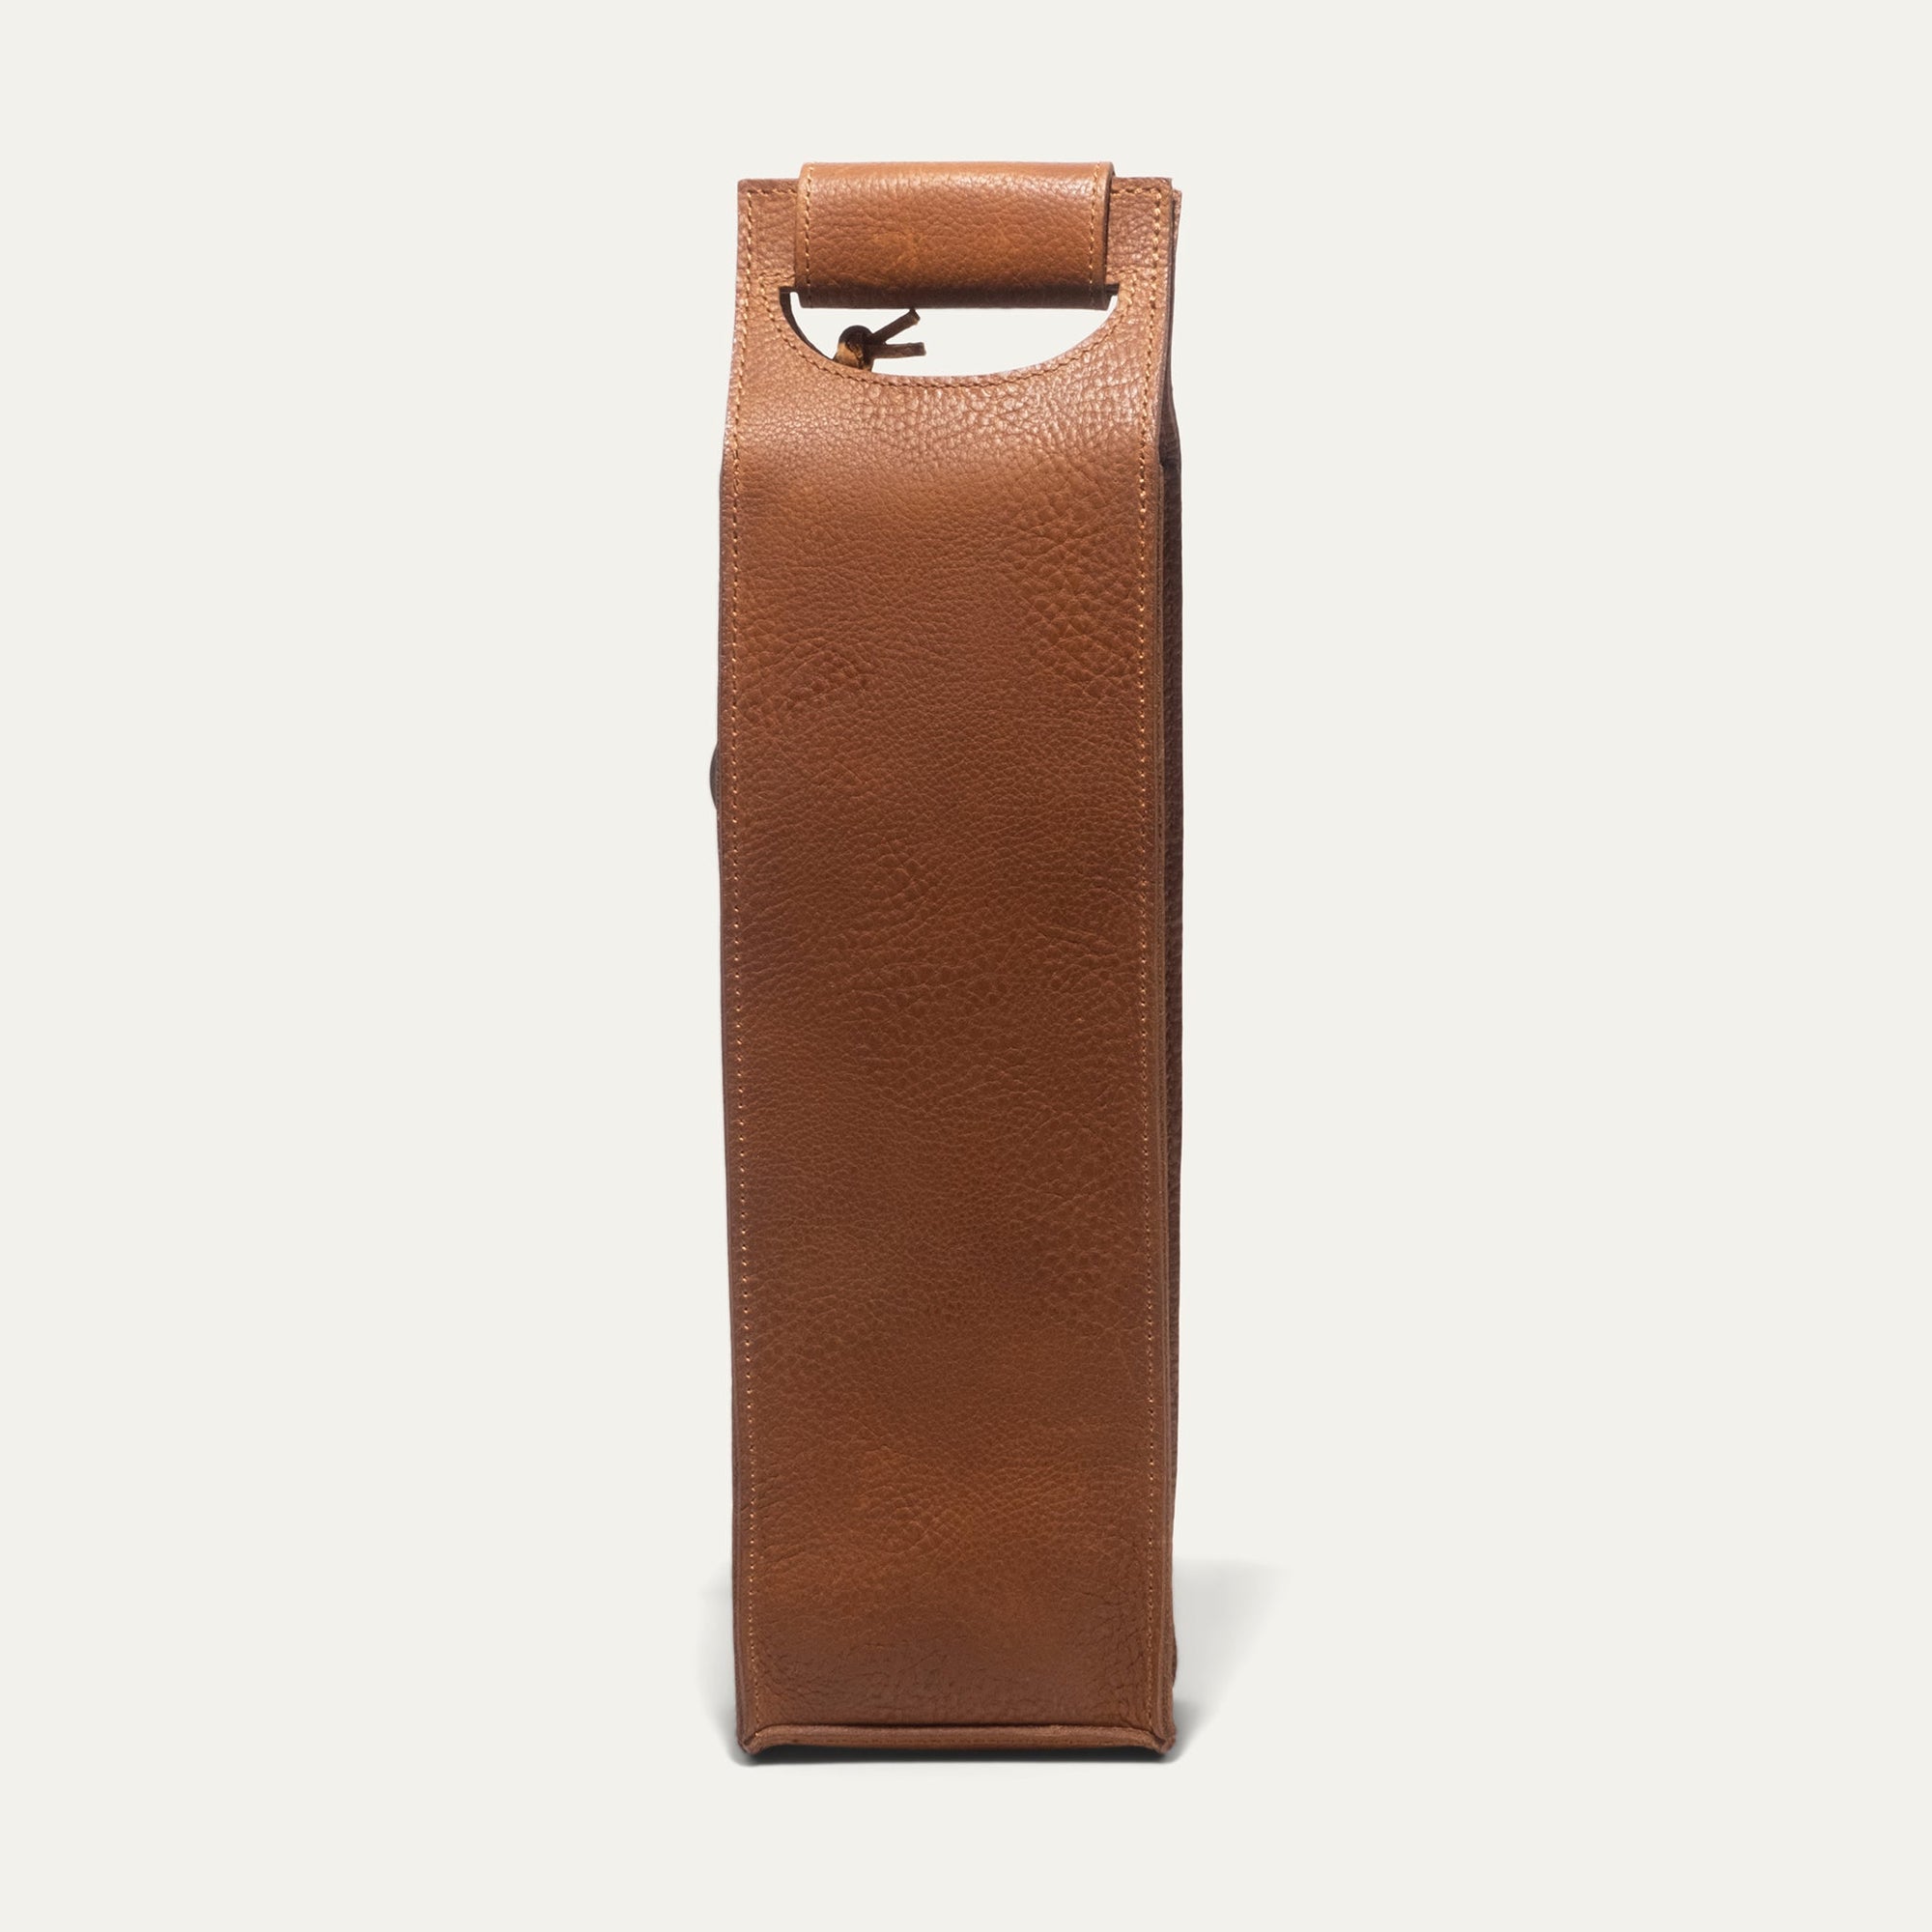 Leather Wine Bottle Case in Tan by Will Leather Goods